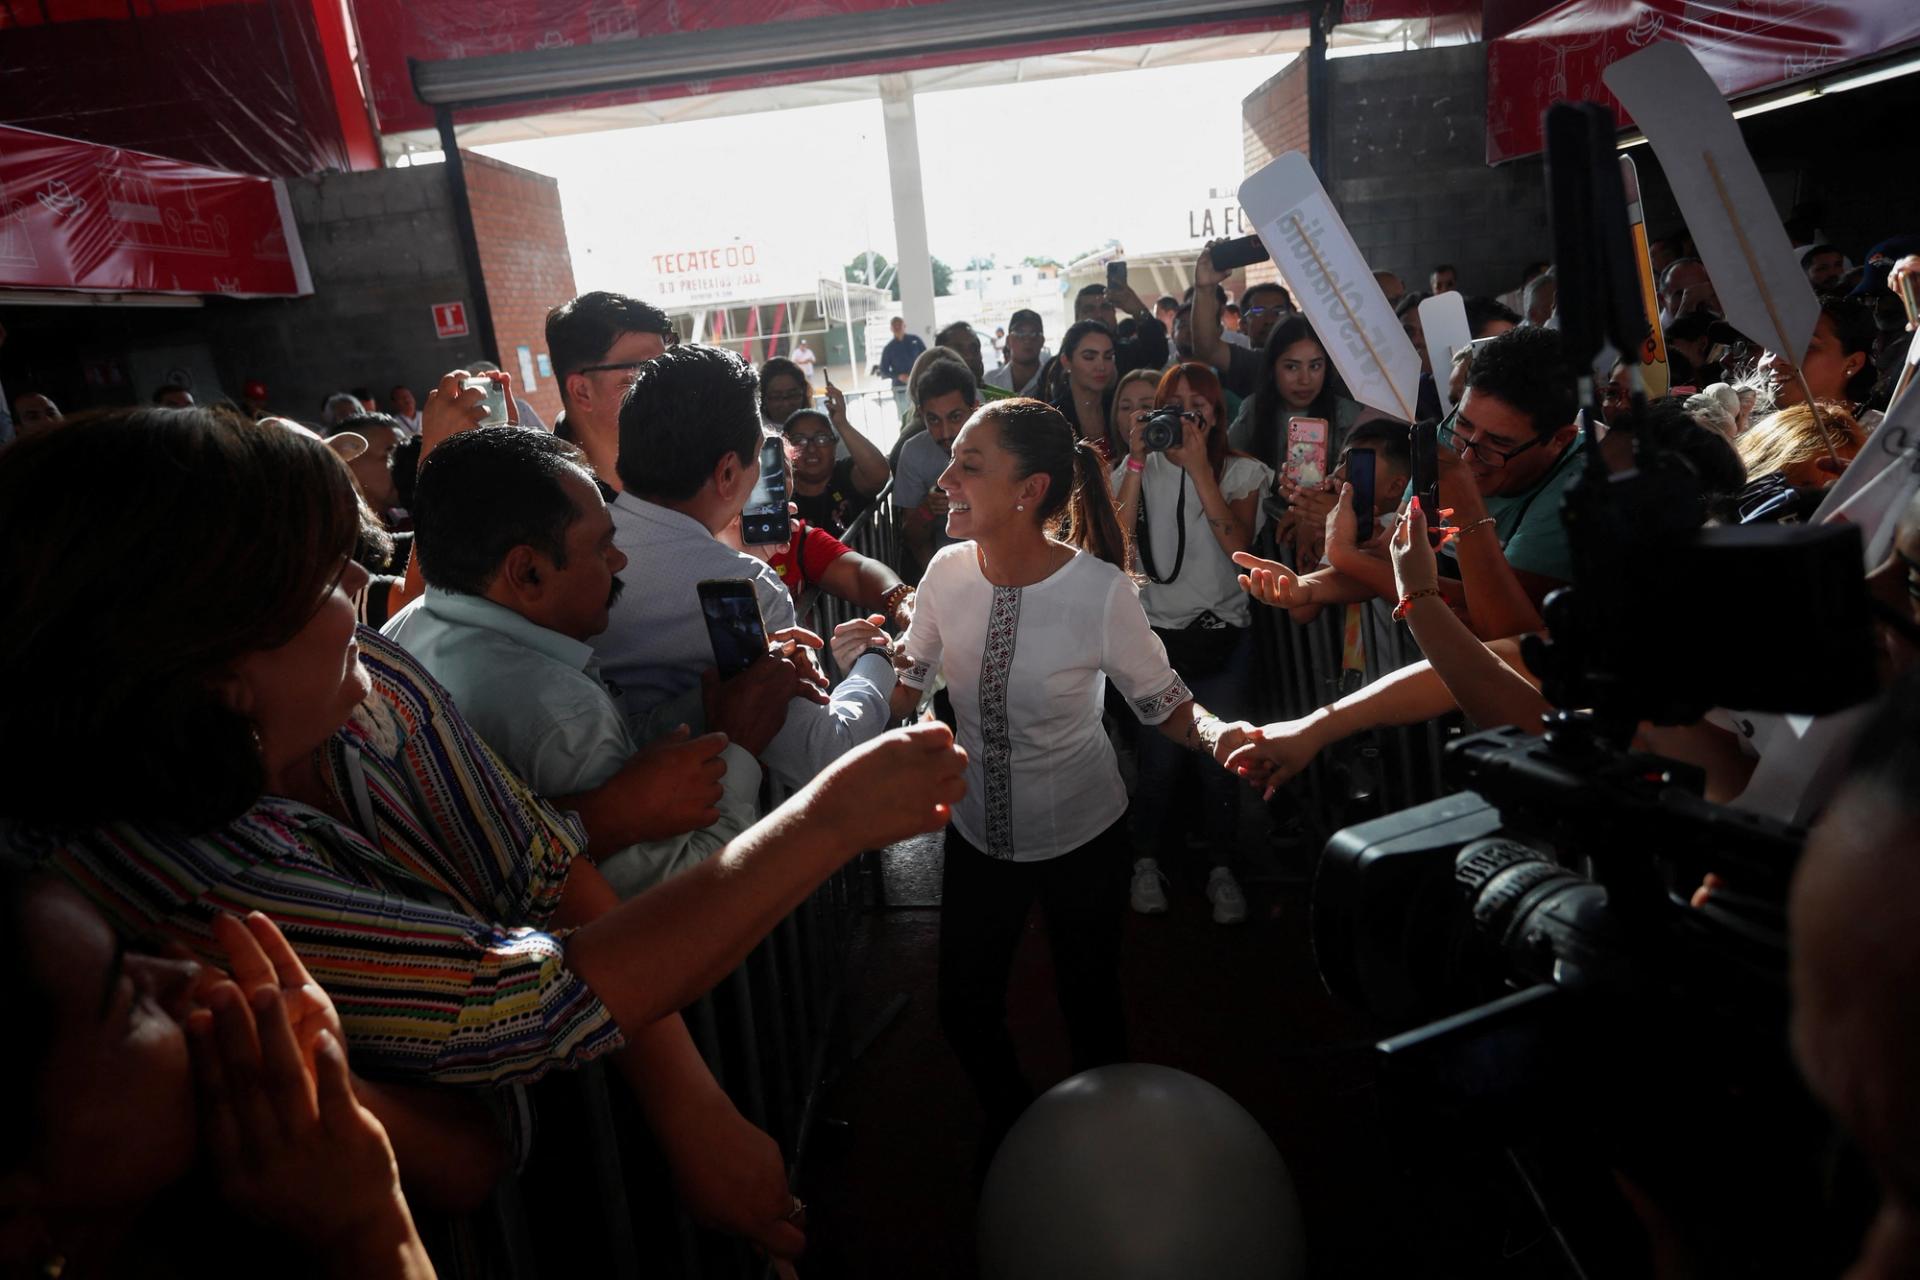 Former Mexico City Mayor Claudia Sheinbaum greets people as she arrives for an event in Guadalupe, Mexico.